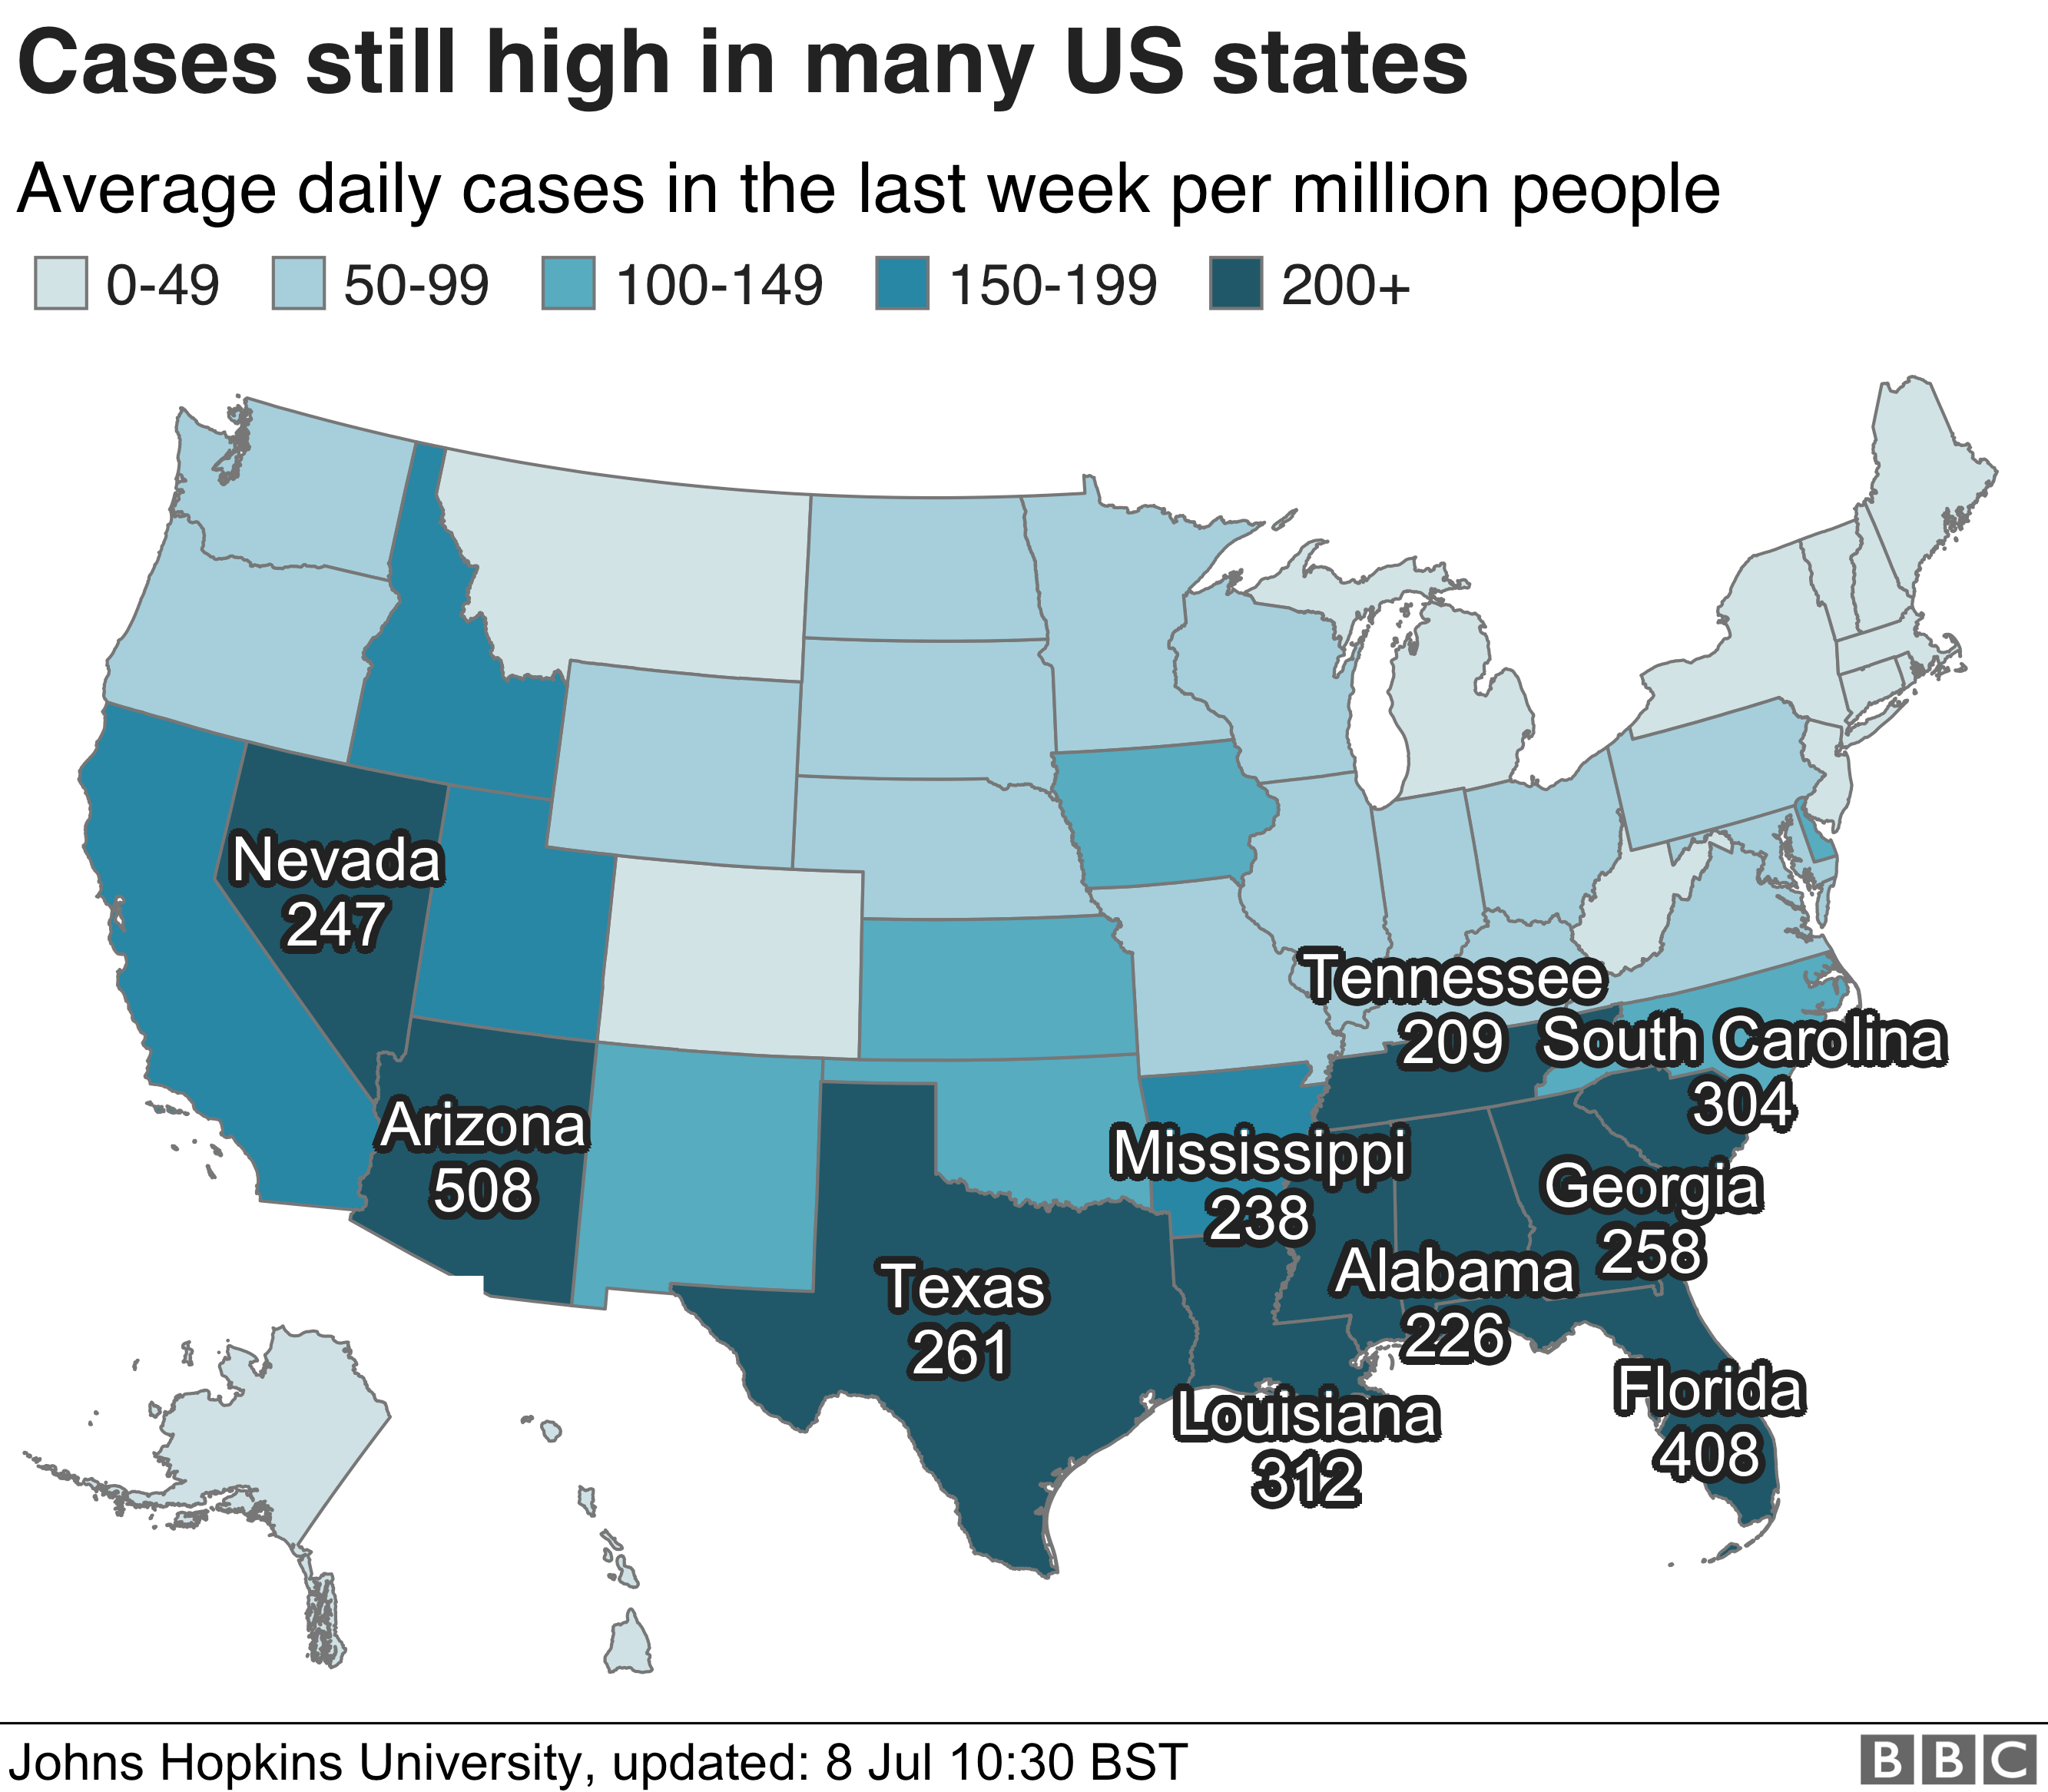 Map of US showing daily cases per million population by US state. 8 July.